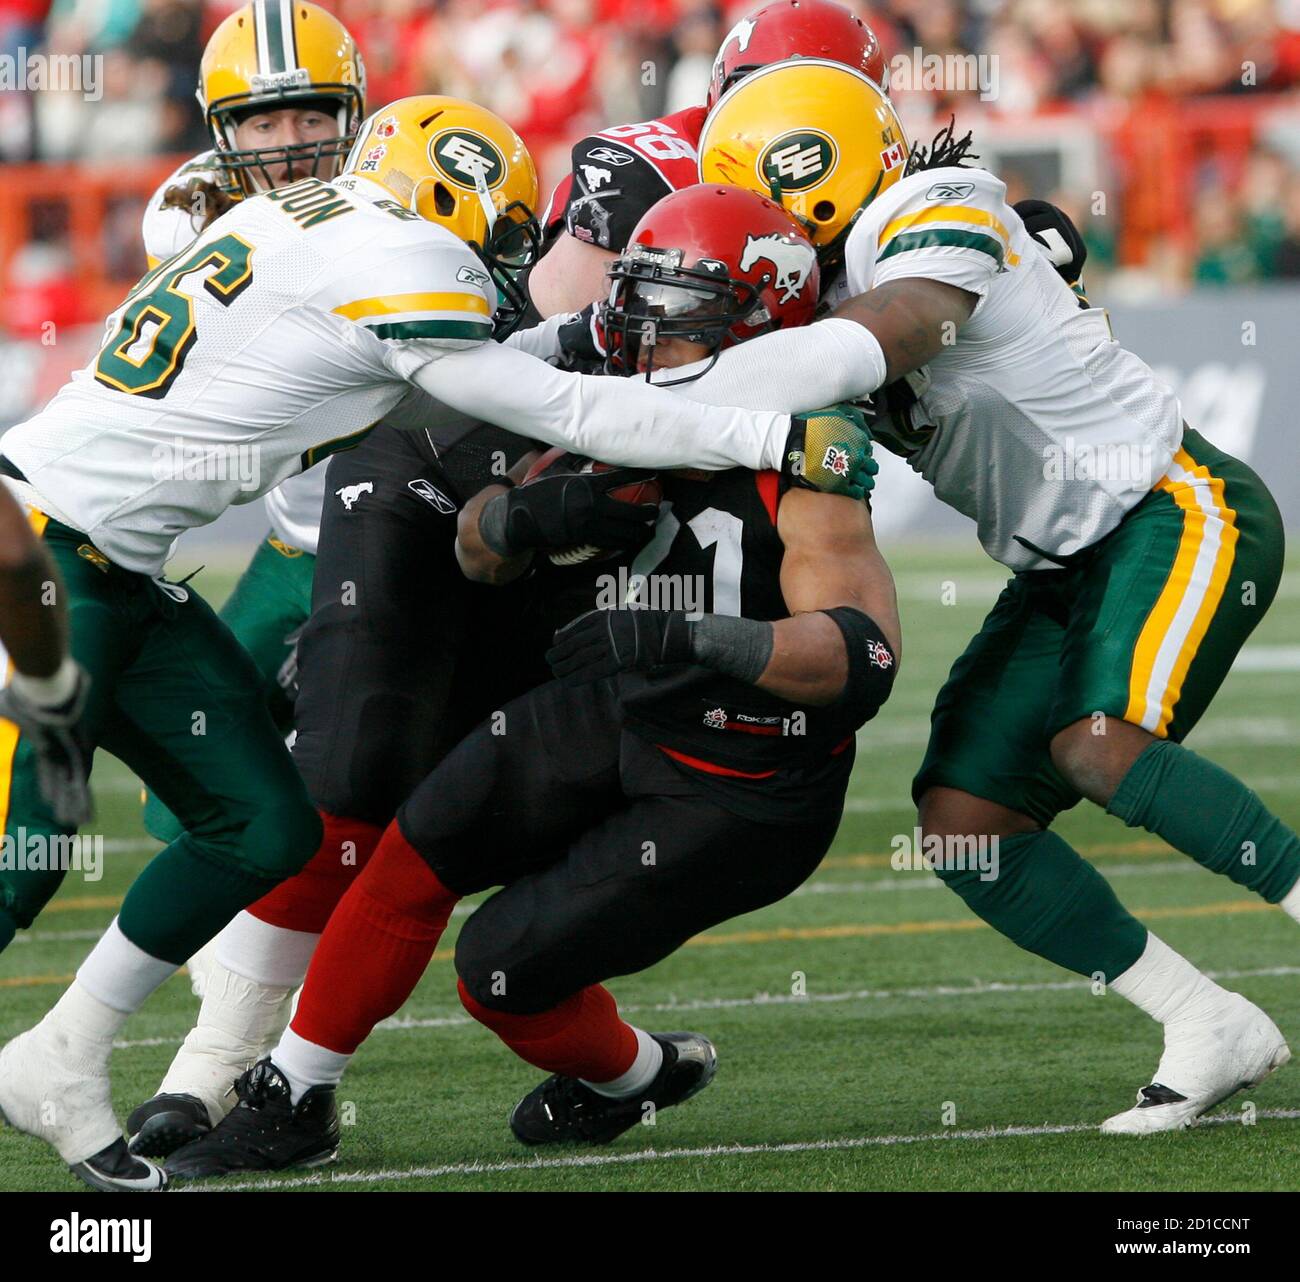 Jack reynolds football High Resolution Stock Photography and Images - Alamy